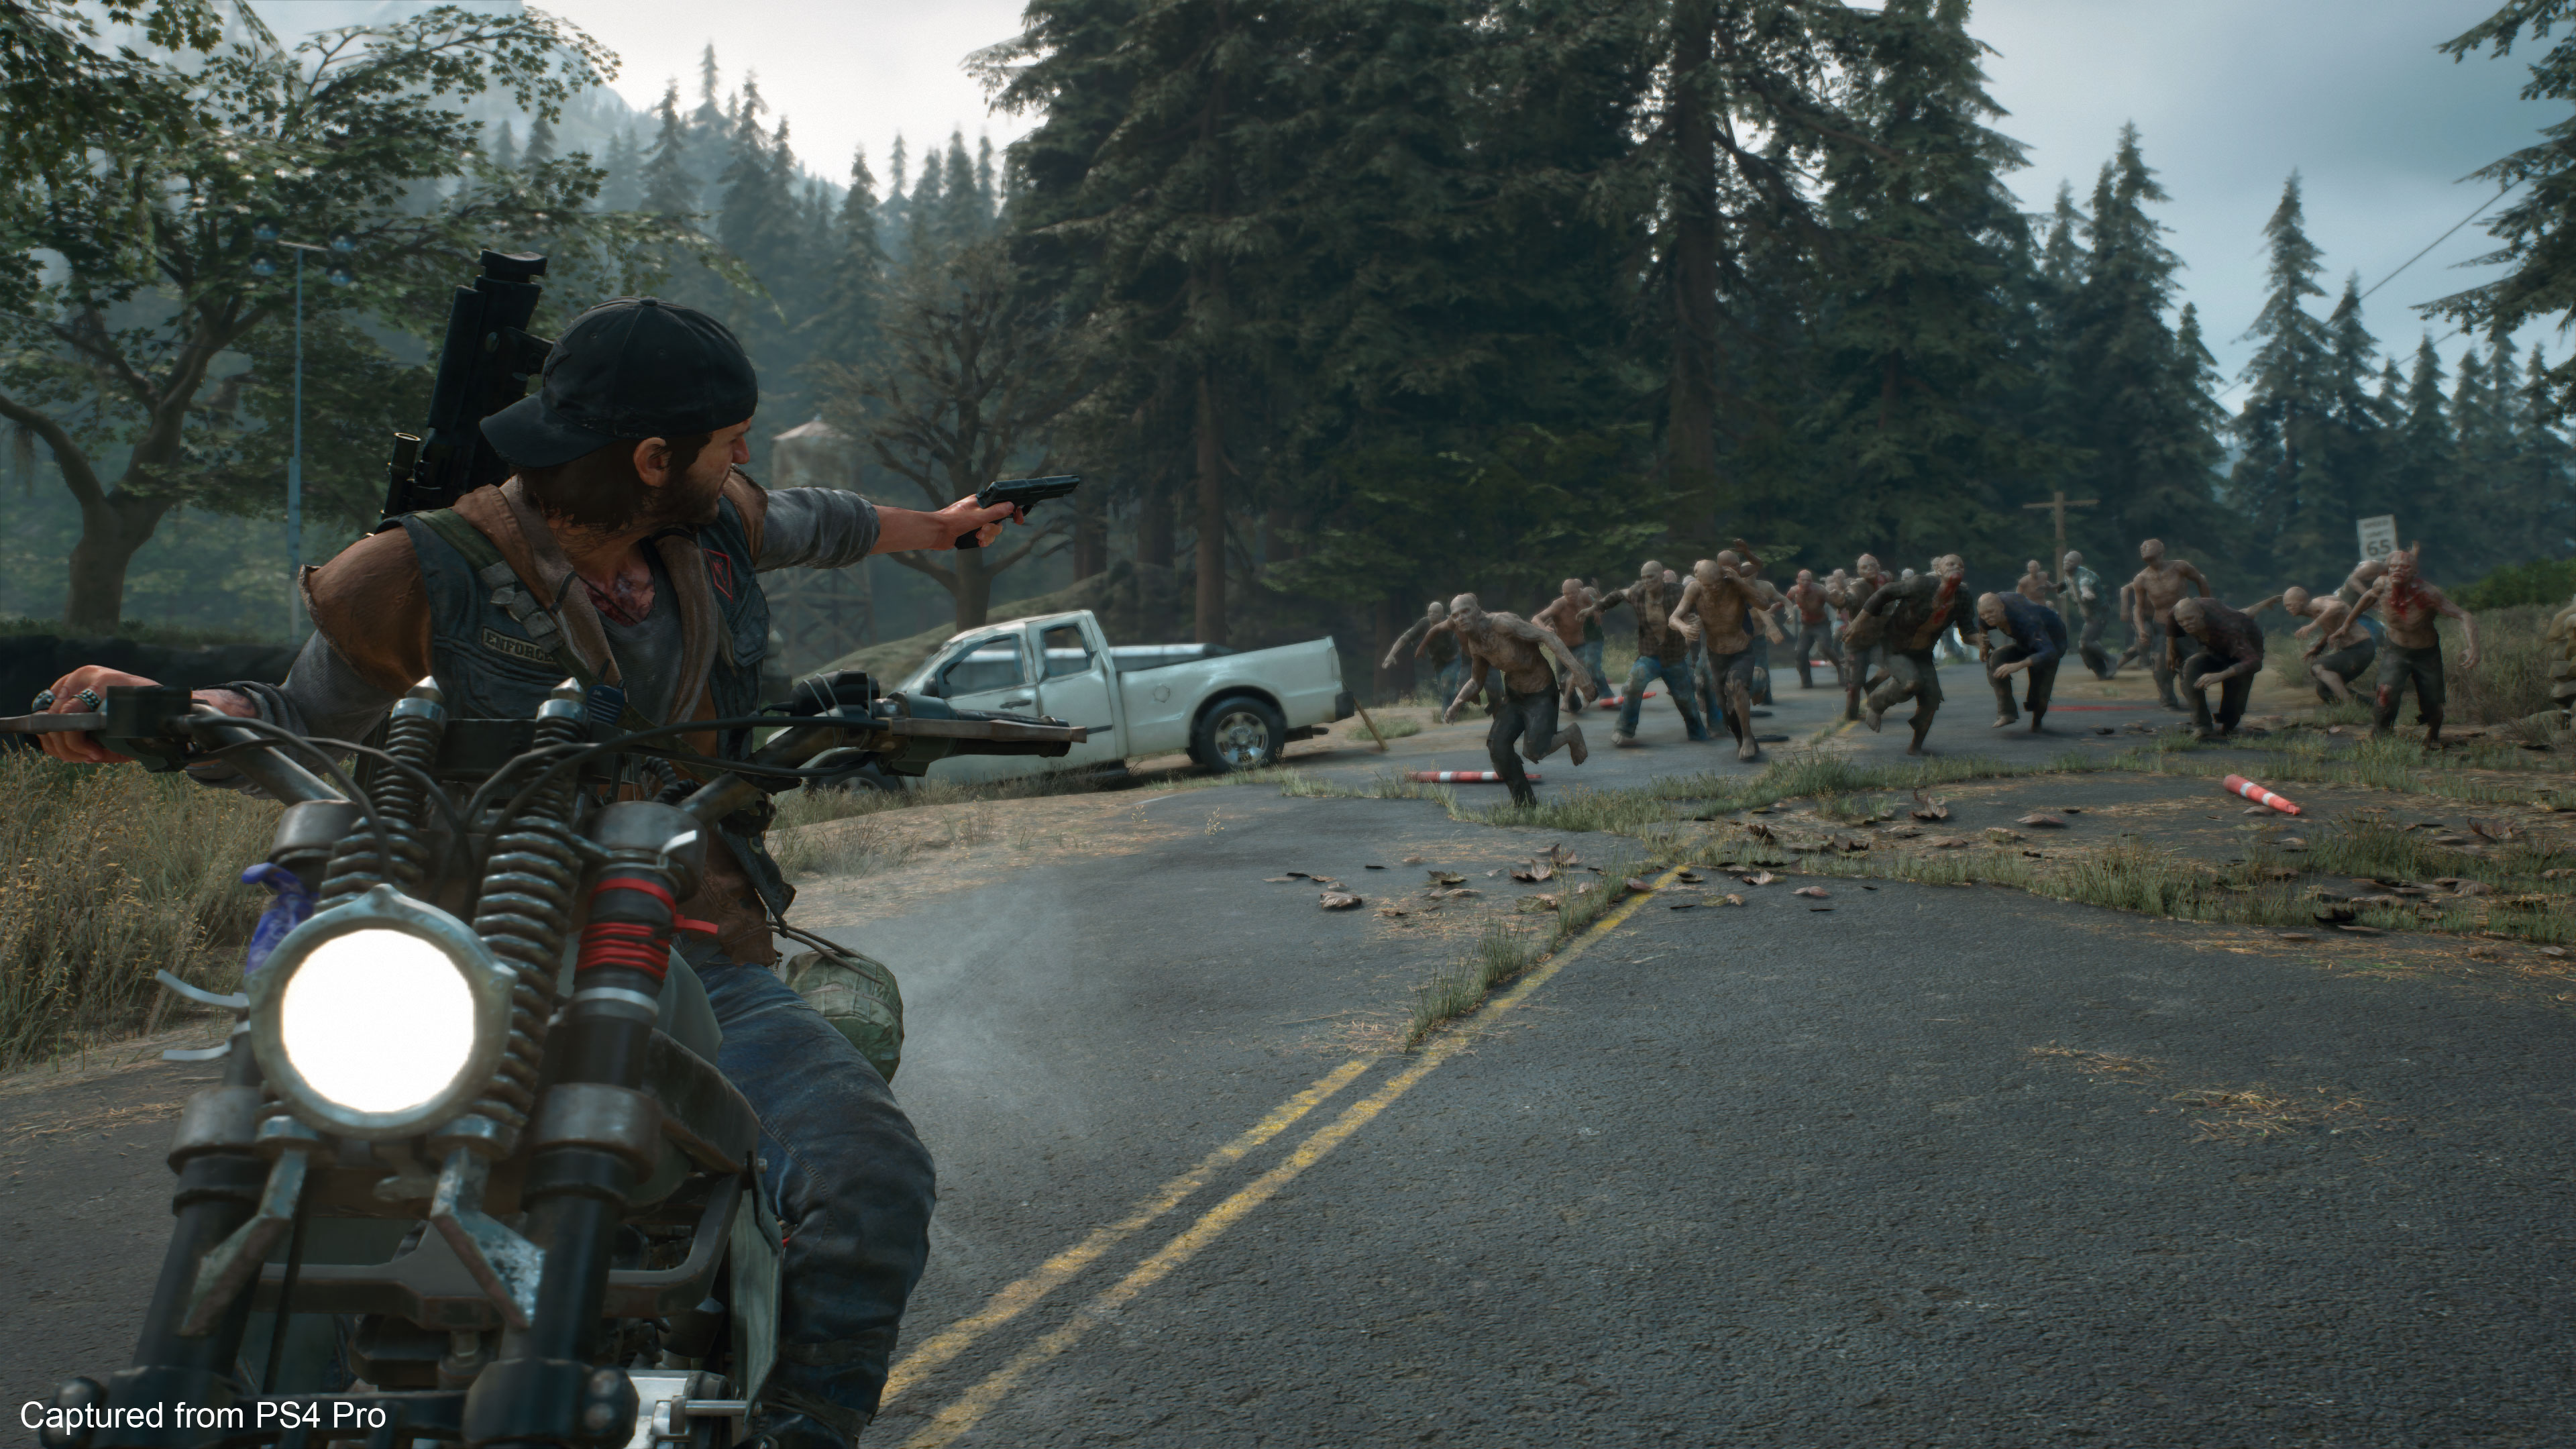 Fireside chat: is Days Gone worth buying?